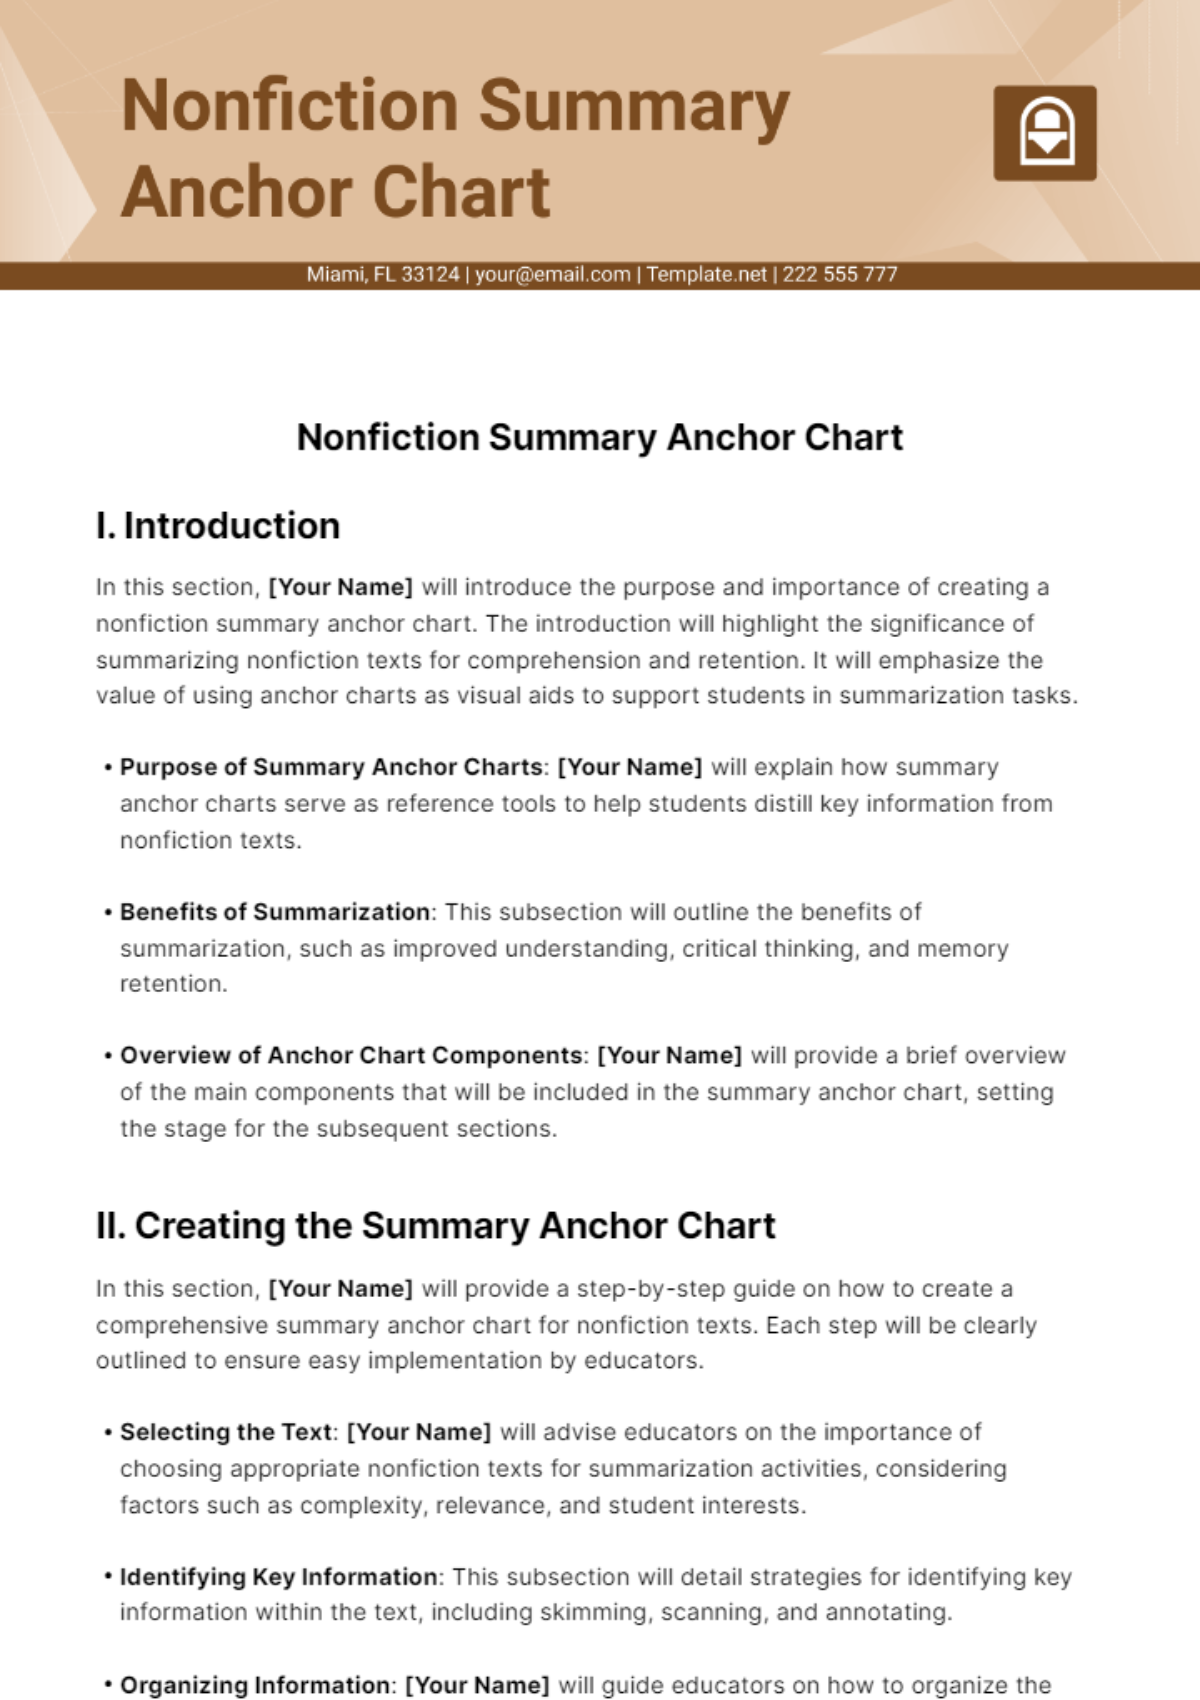 Free Nonfiction Summary Anchor Chart Template